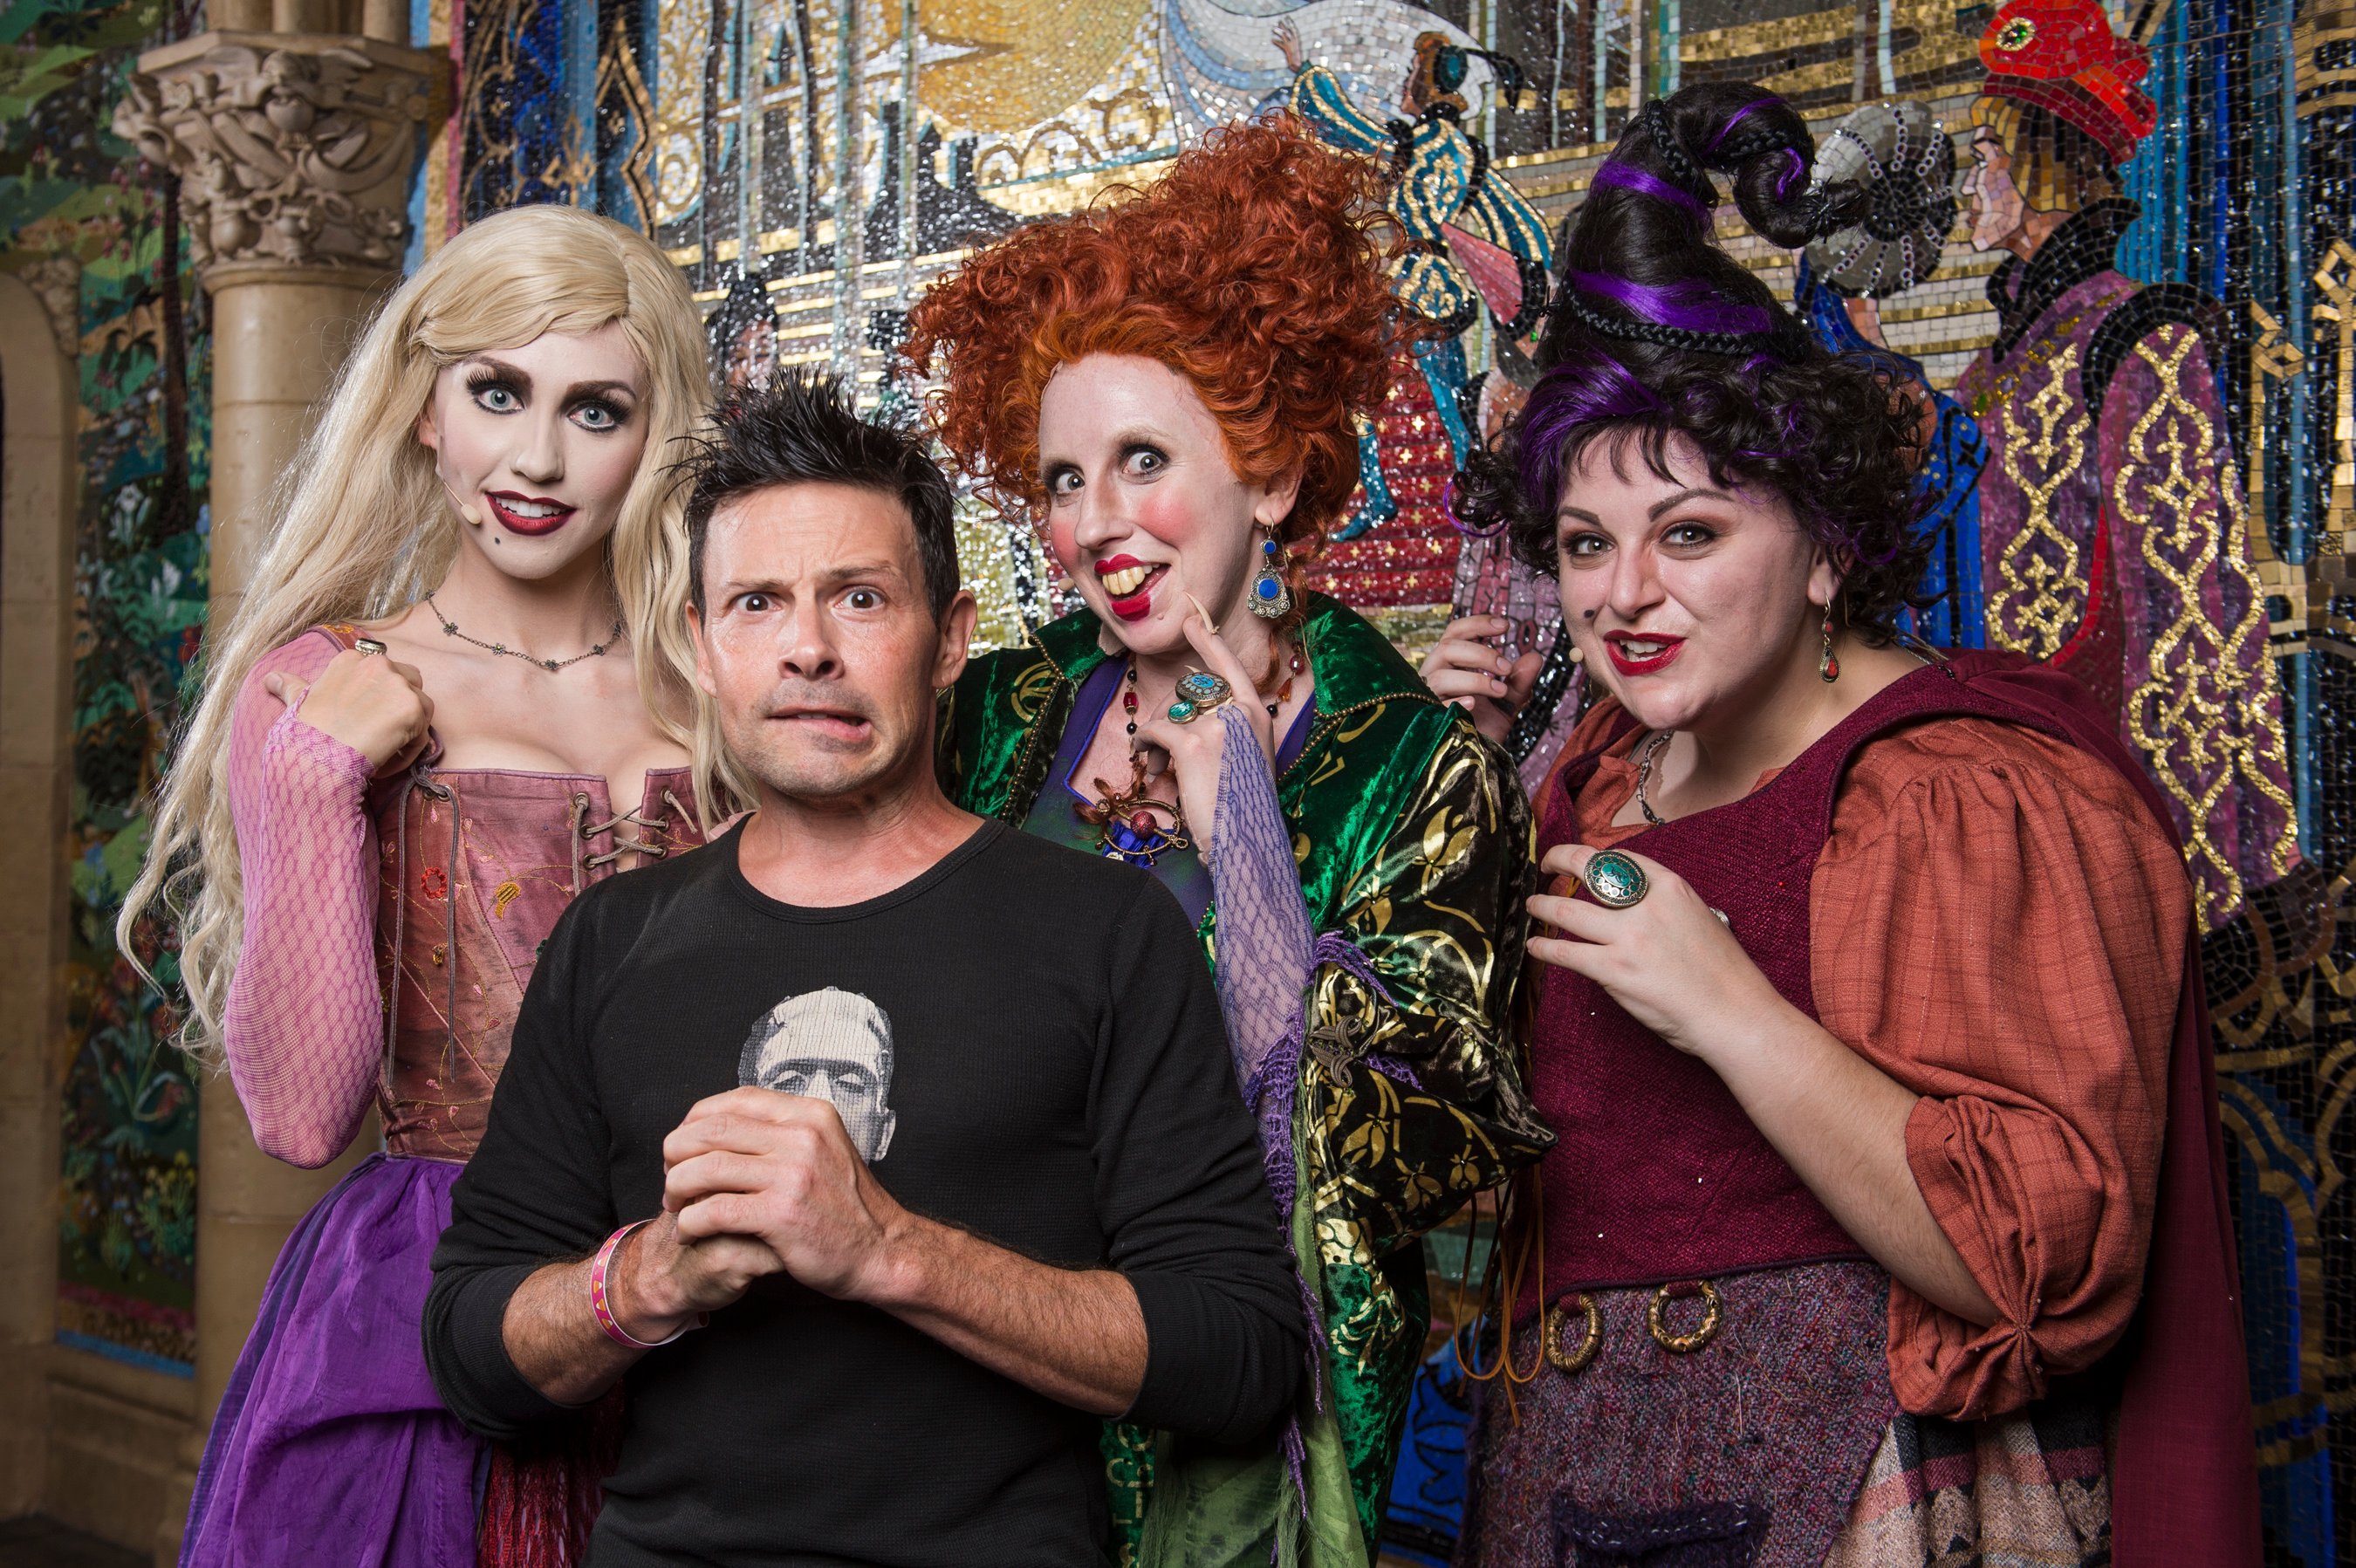 Actor Jason Marsden, who voiced the cat Thackery Binx in Disney's 'Hocus Pocus' visits the Sanderson Sisters